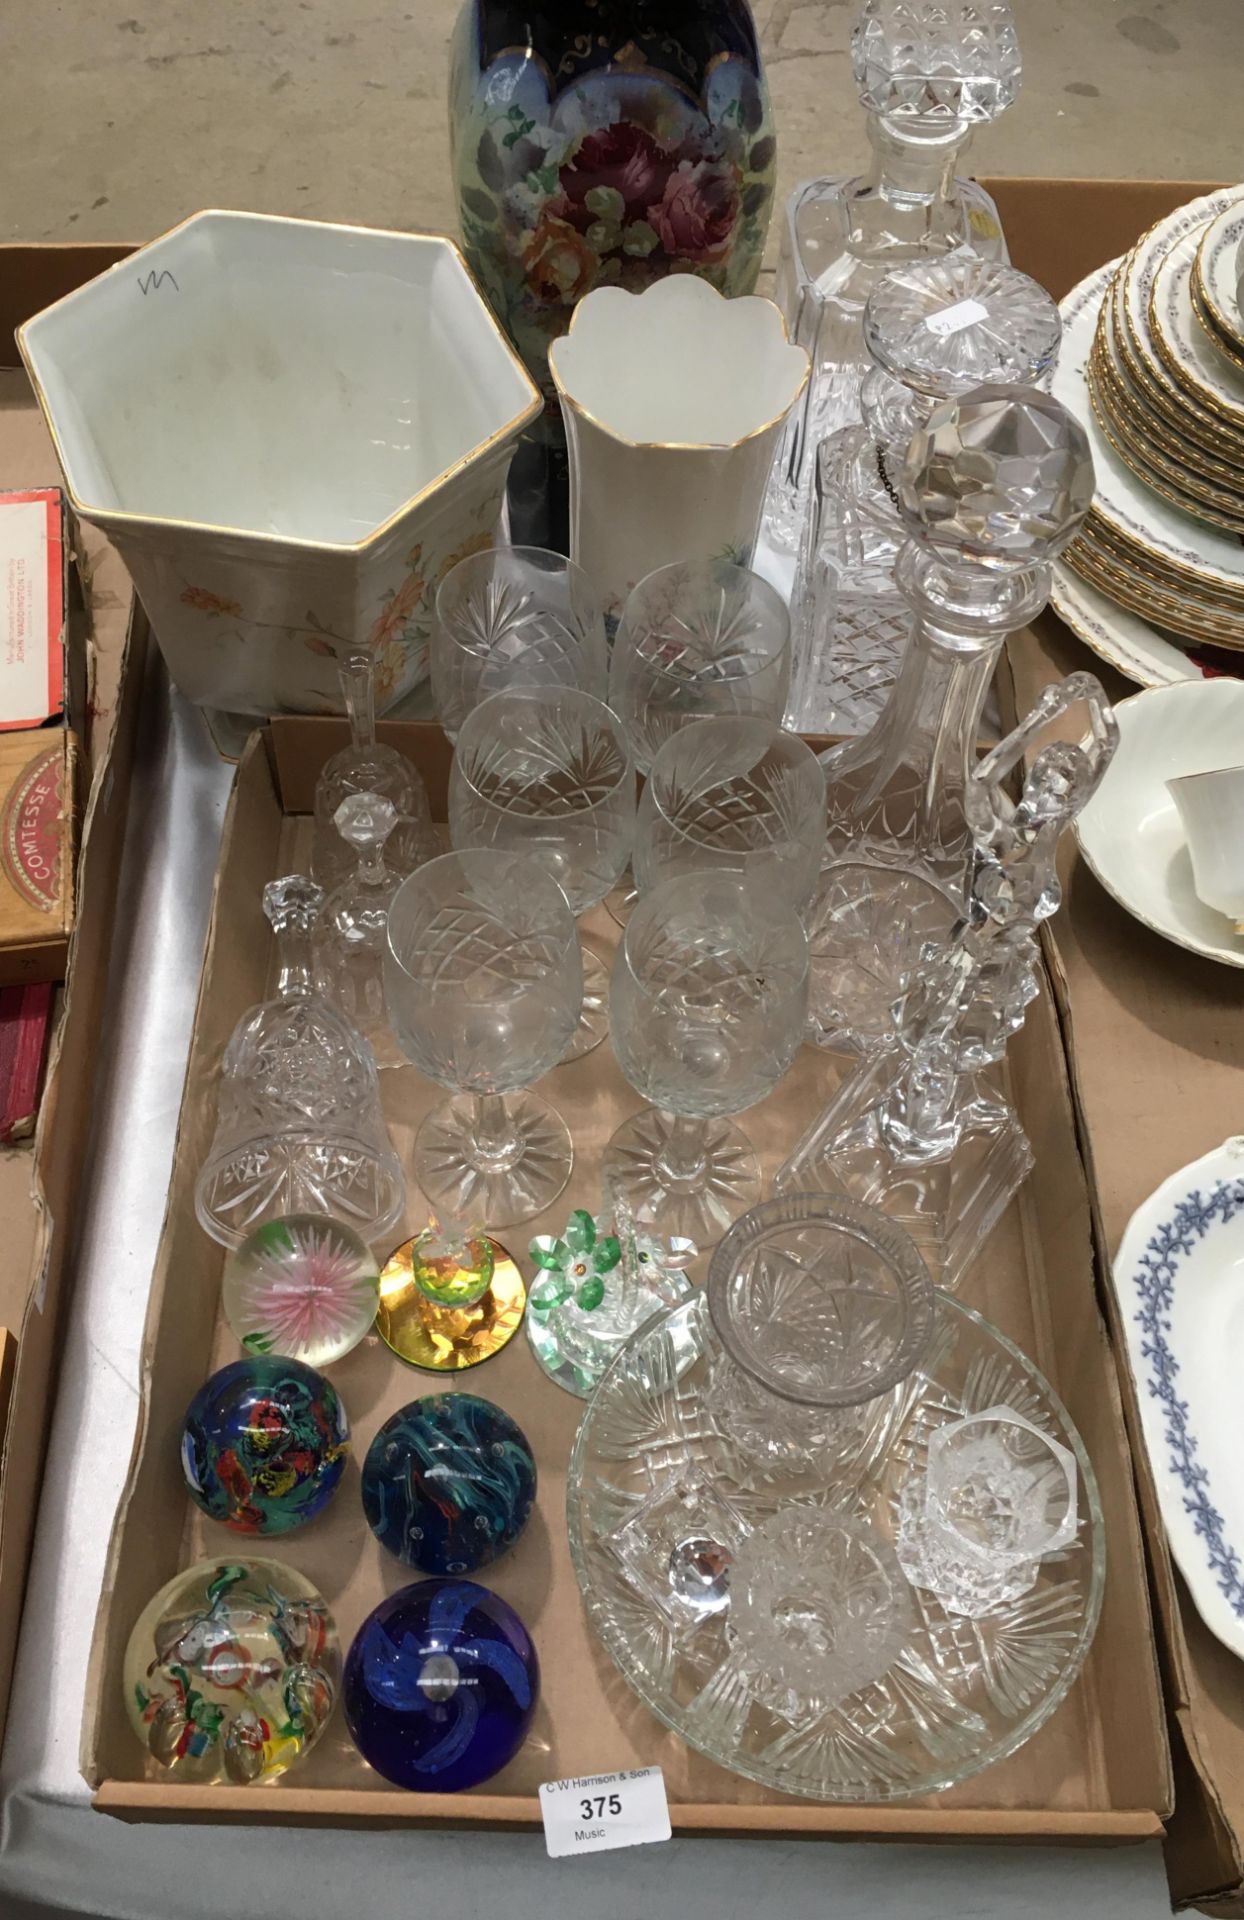 Contents to tray 3 glass decanters, a glass sculpture of a ballet dancer, 5 glass paperweights,